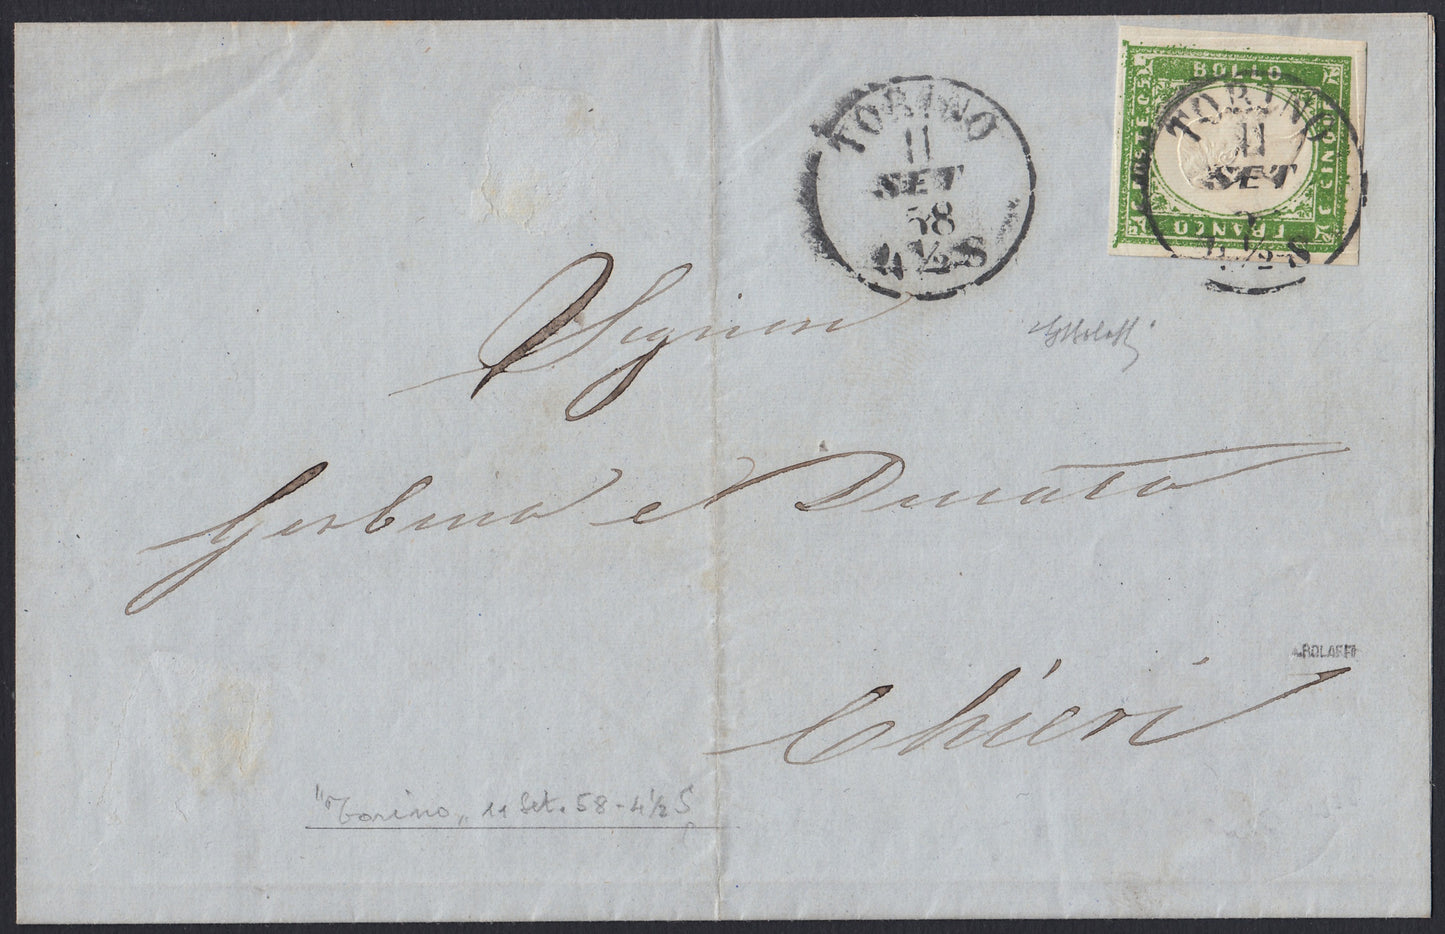 175 - 1858 - Printed circular sent from Turin to Chieri 11/9/58, franked with c. 5 green yellow defective print I composition edition 1857 isolated, very rare and very beautiful. (13Ah).